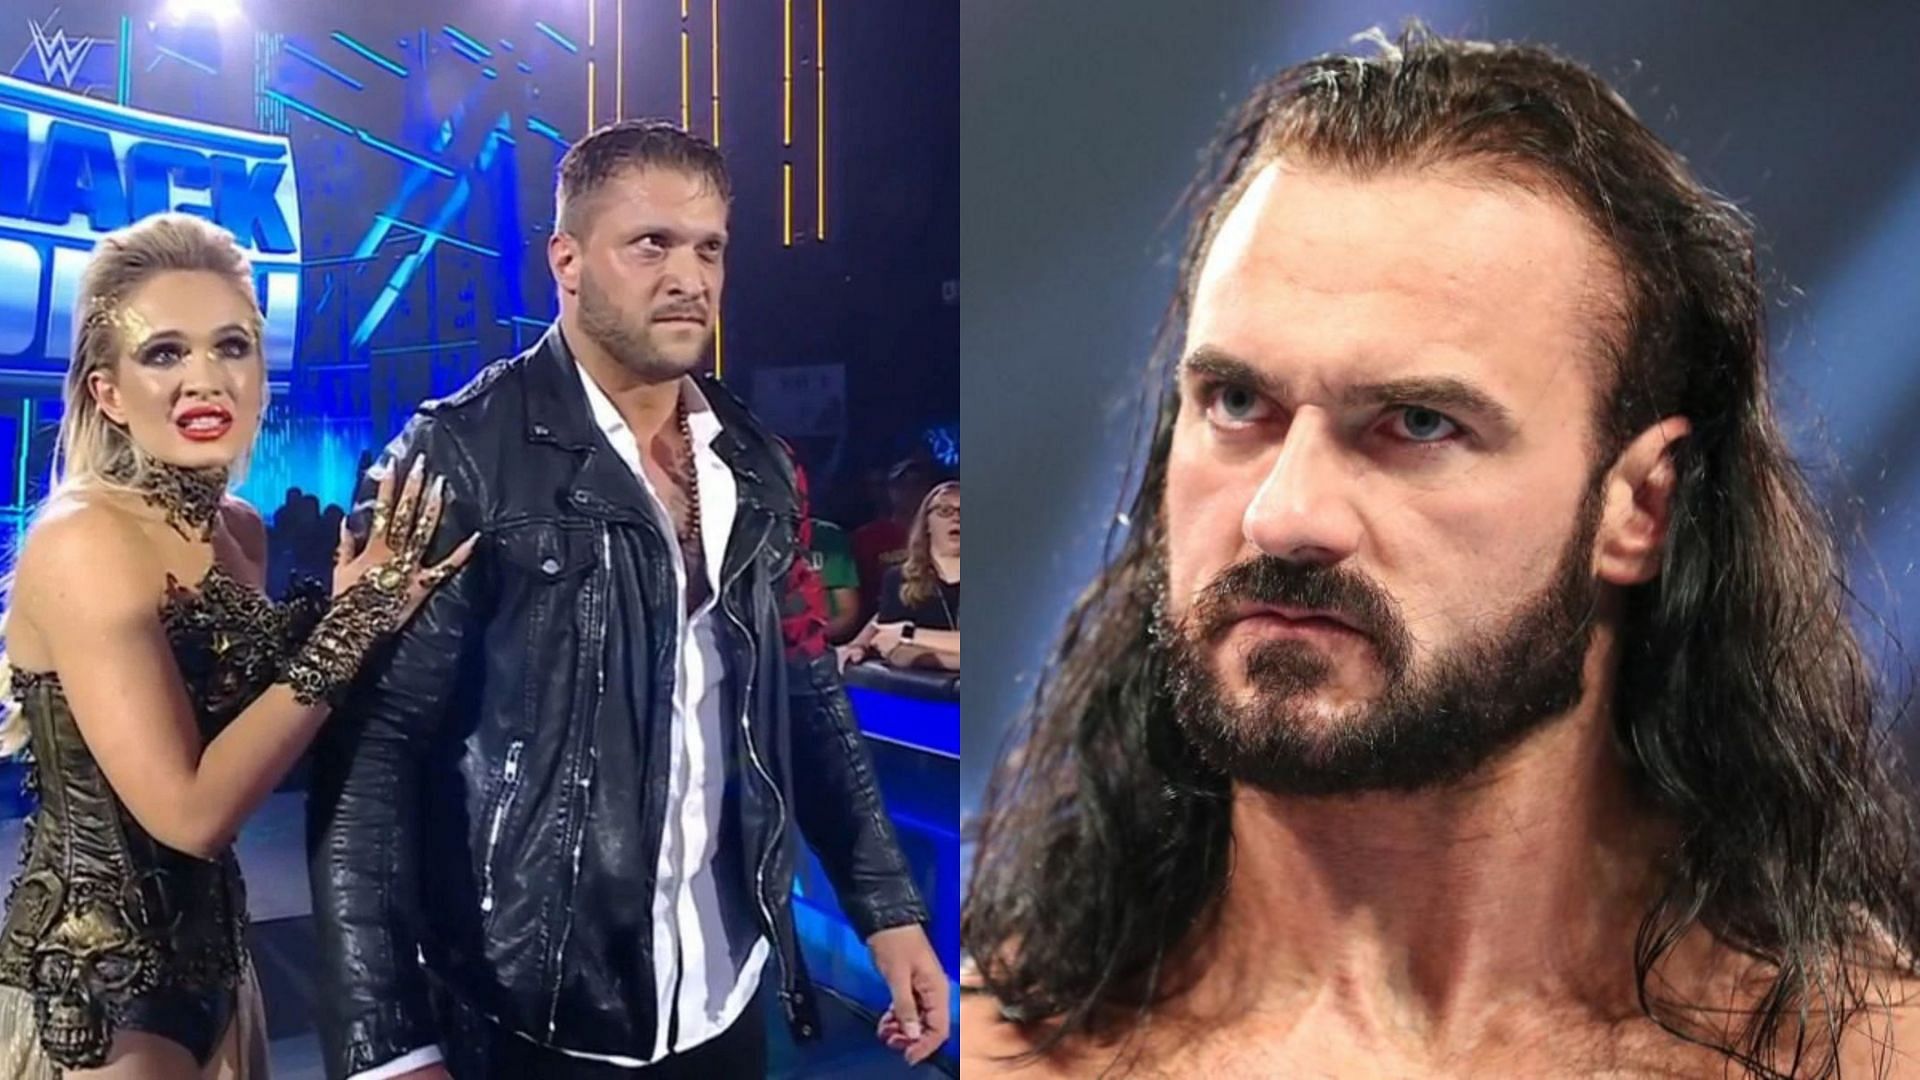 Karrion Kross will square off against Drew McIntyre at WWE Crown Jewel 2022